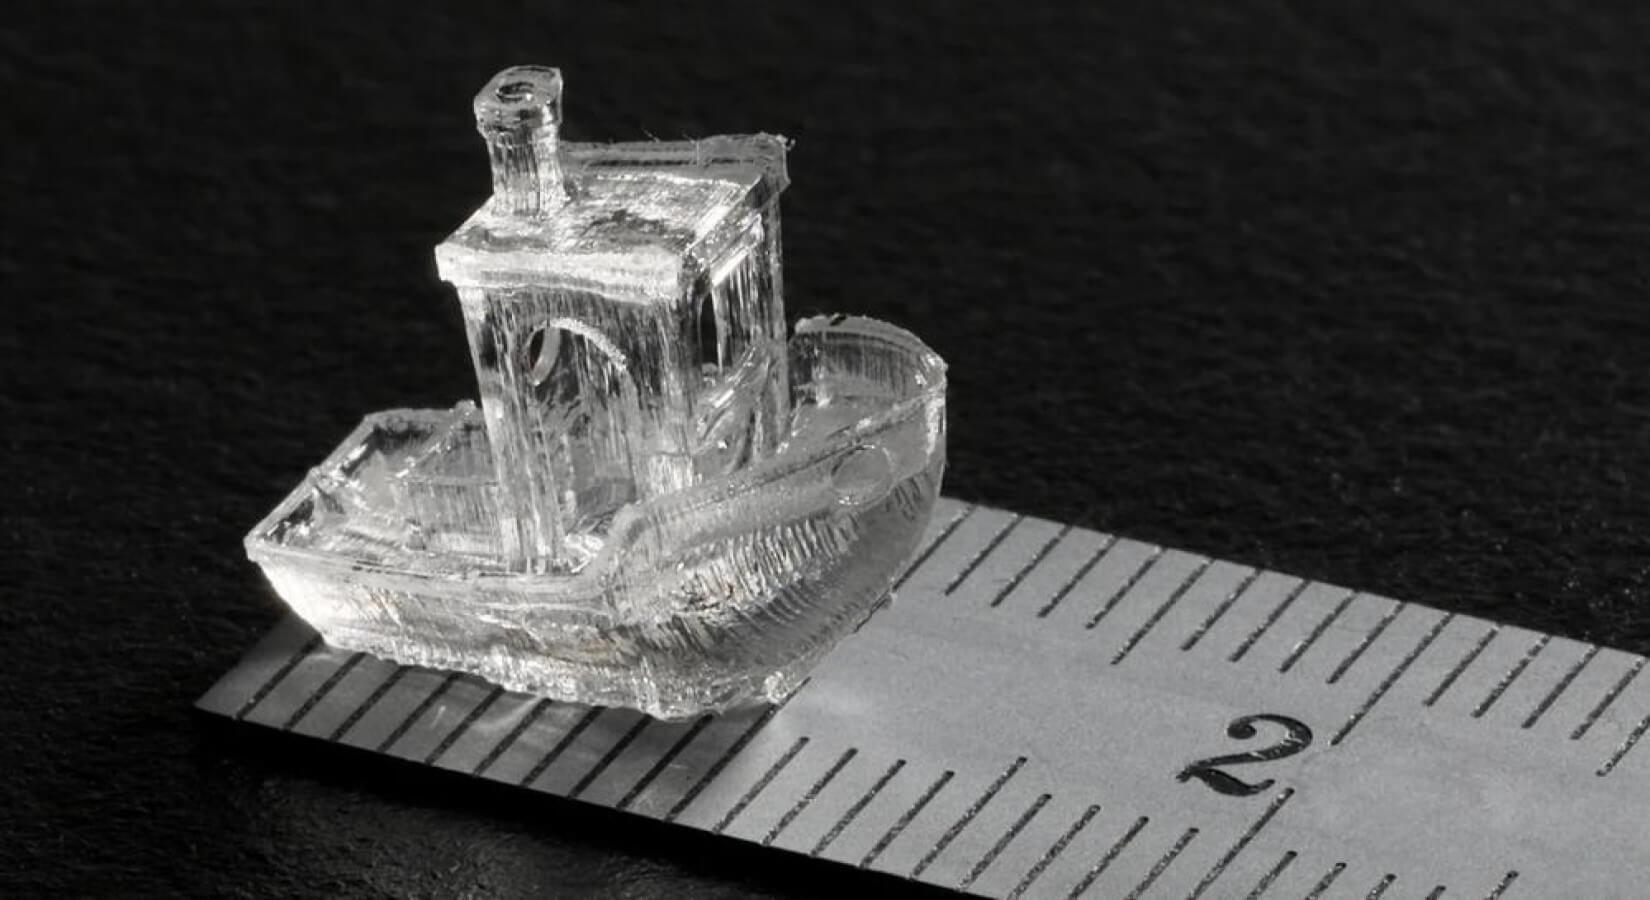 Researchers Discover Method to 3D Print Objects in Seconds - PrinterMods UK Ltd